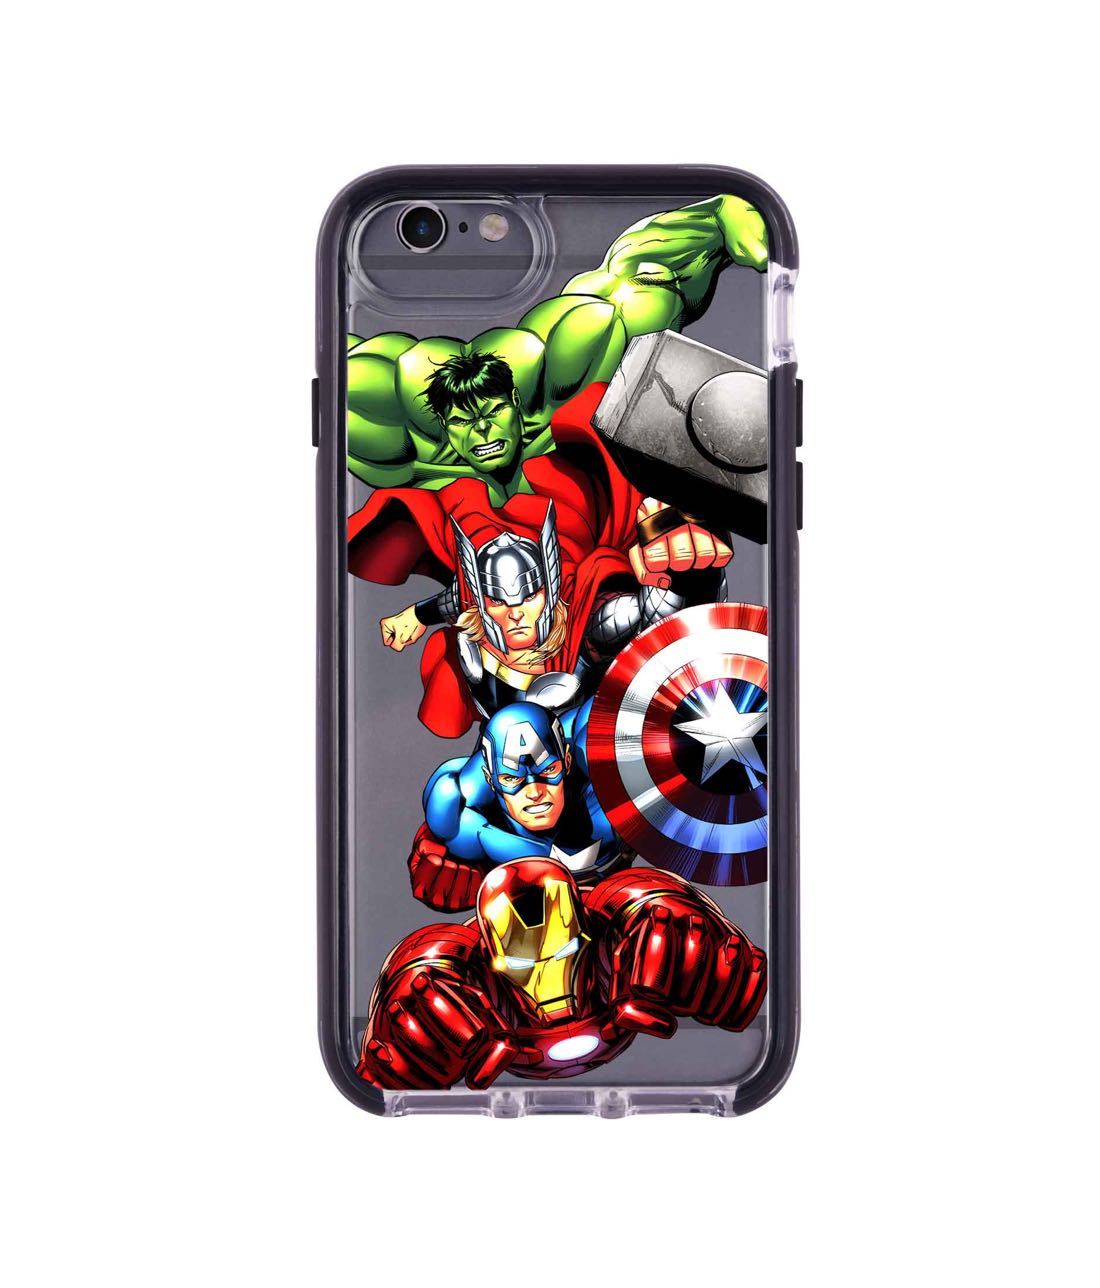 Avengers Fury - Extreme Phone Case for iPhone 6S Plus